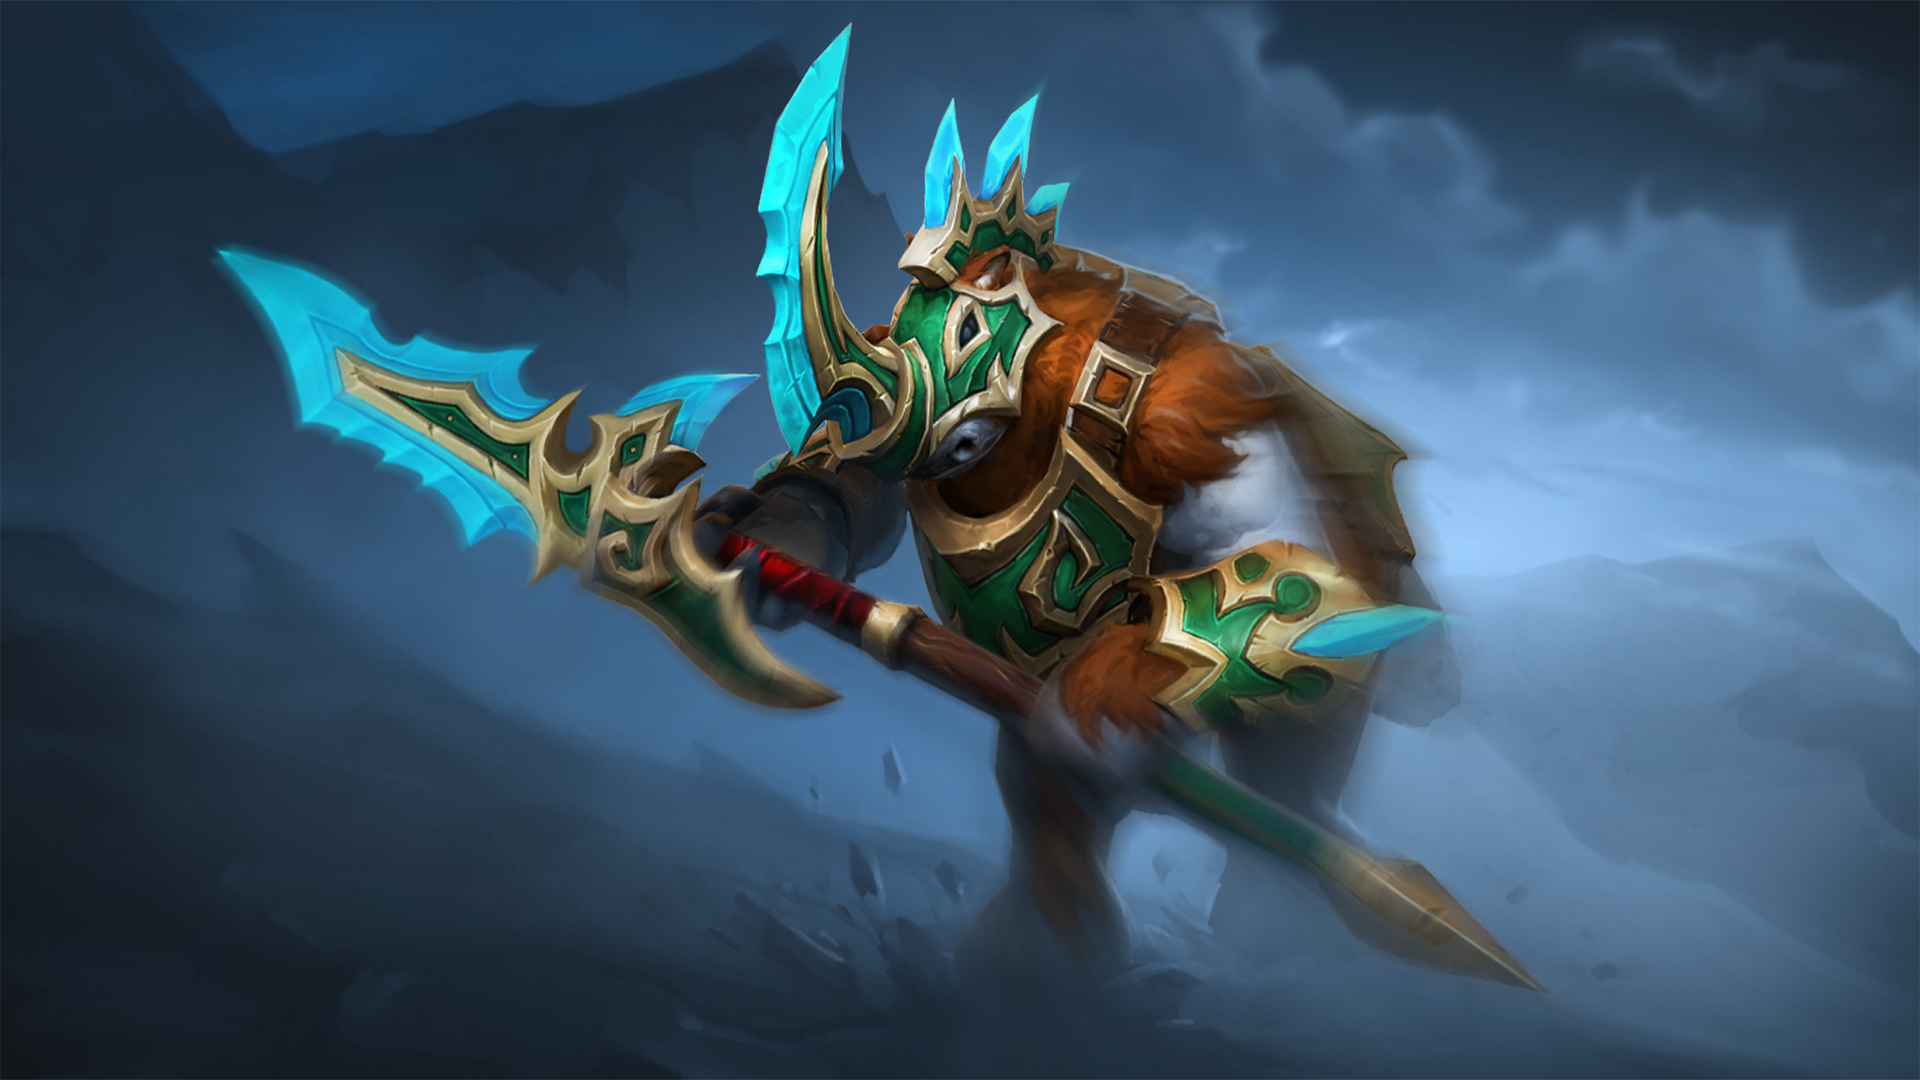 Dota 2 7 23c Patch Nerfs Magnus Upgraded Skewer Gives Treant